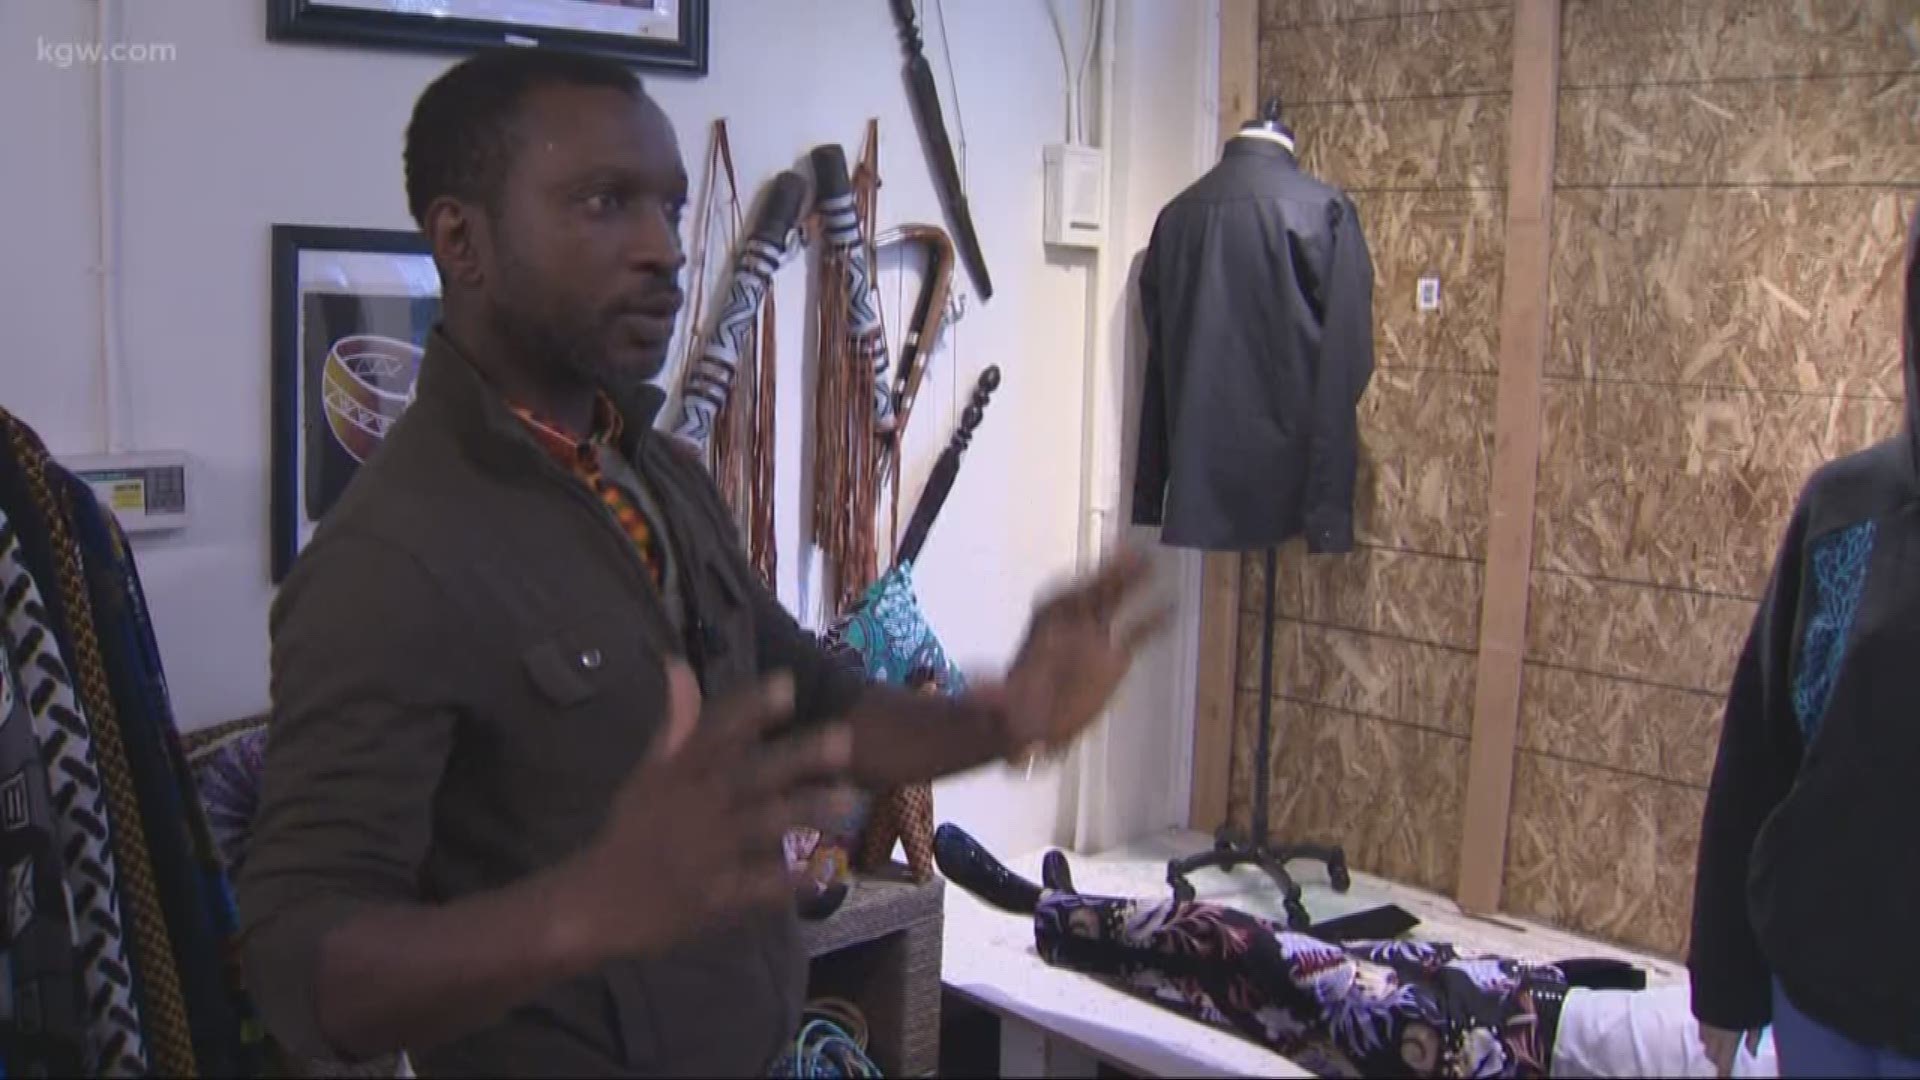 The African Art, decor, and fashion store on Southwest Harvey Milk Street was broken into Thursday morning.